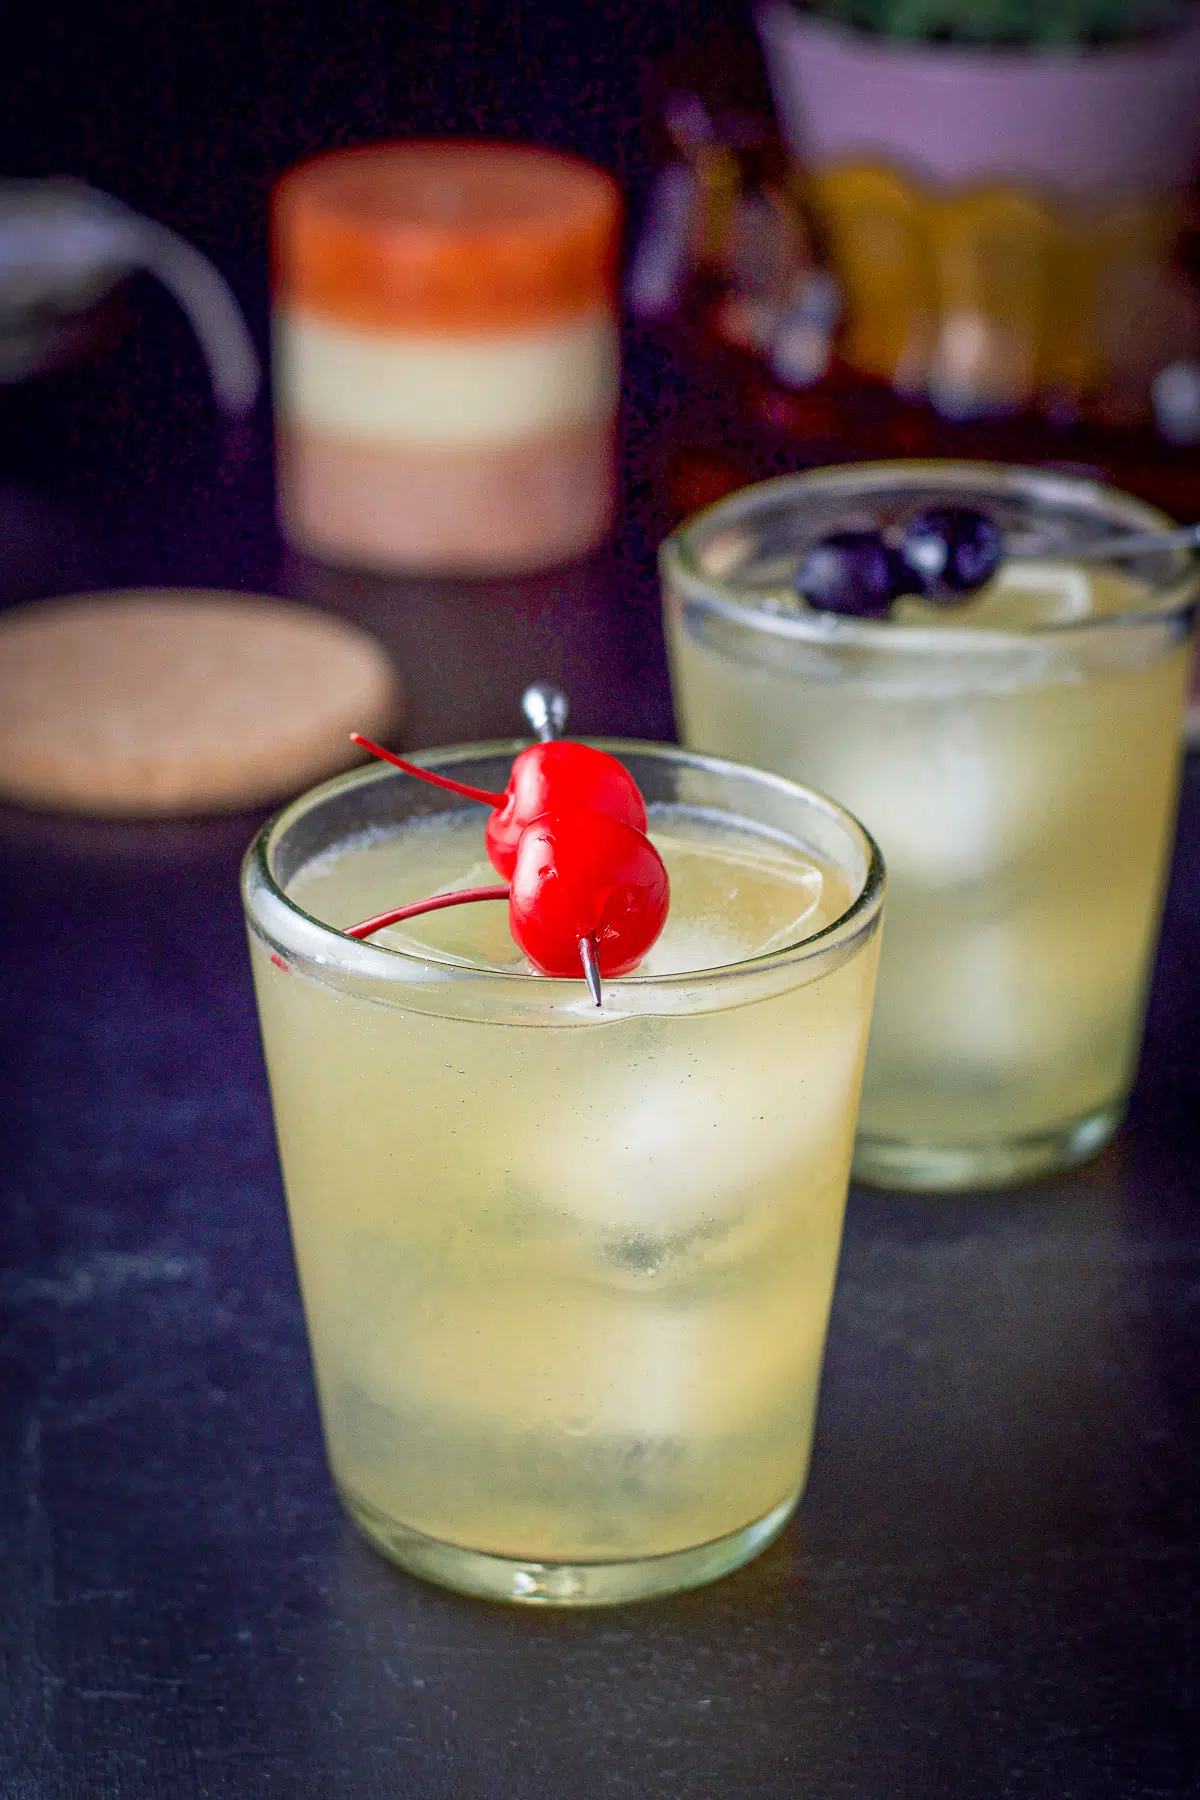 Two double old fashioned glasses filled with the whiskey sour, garnished with cherries